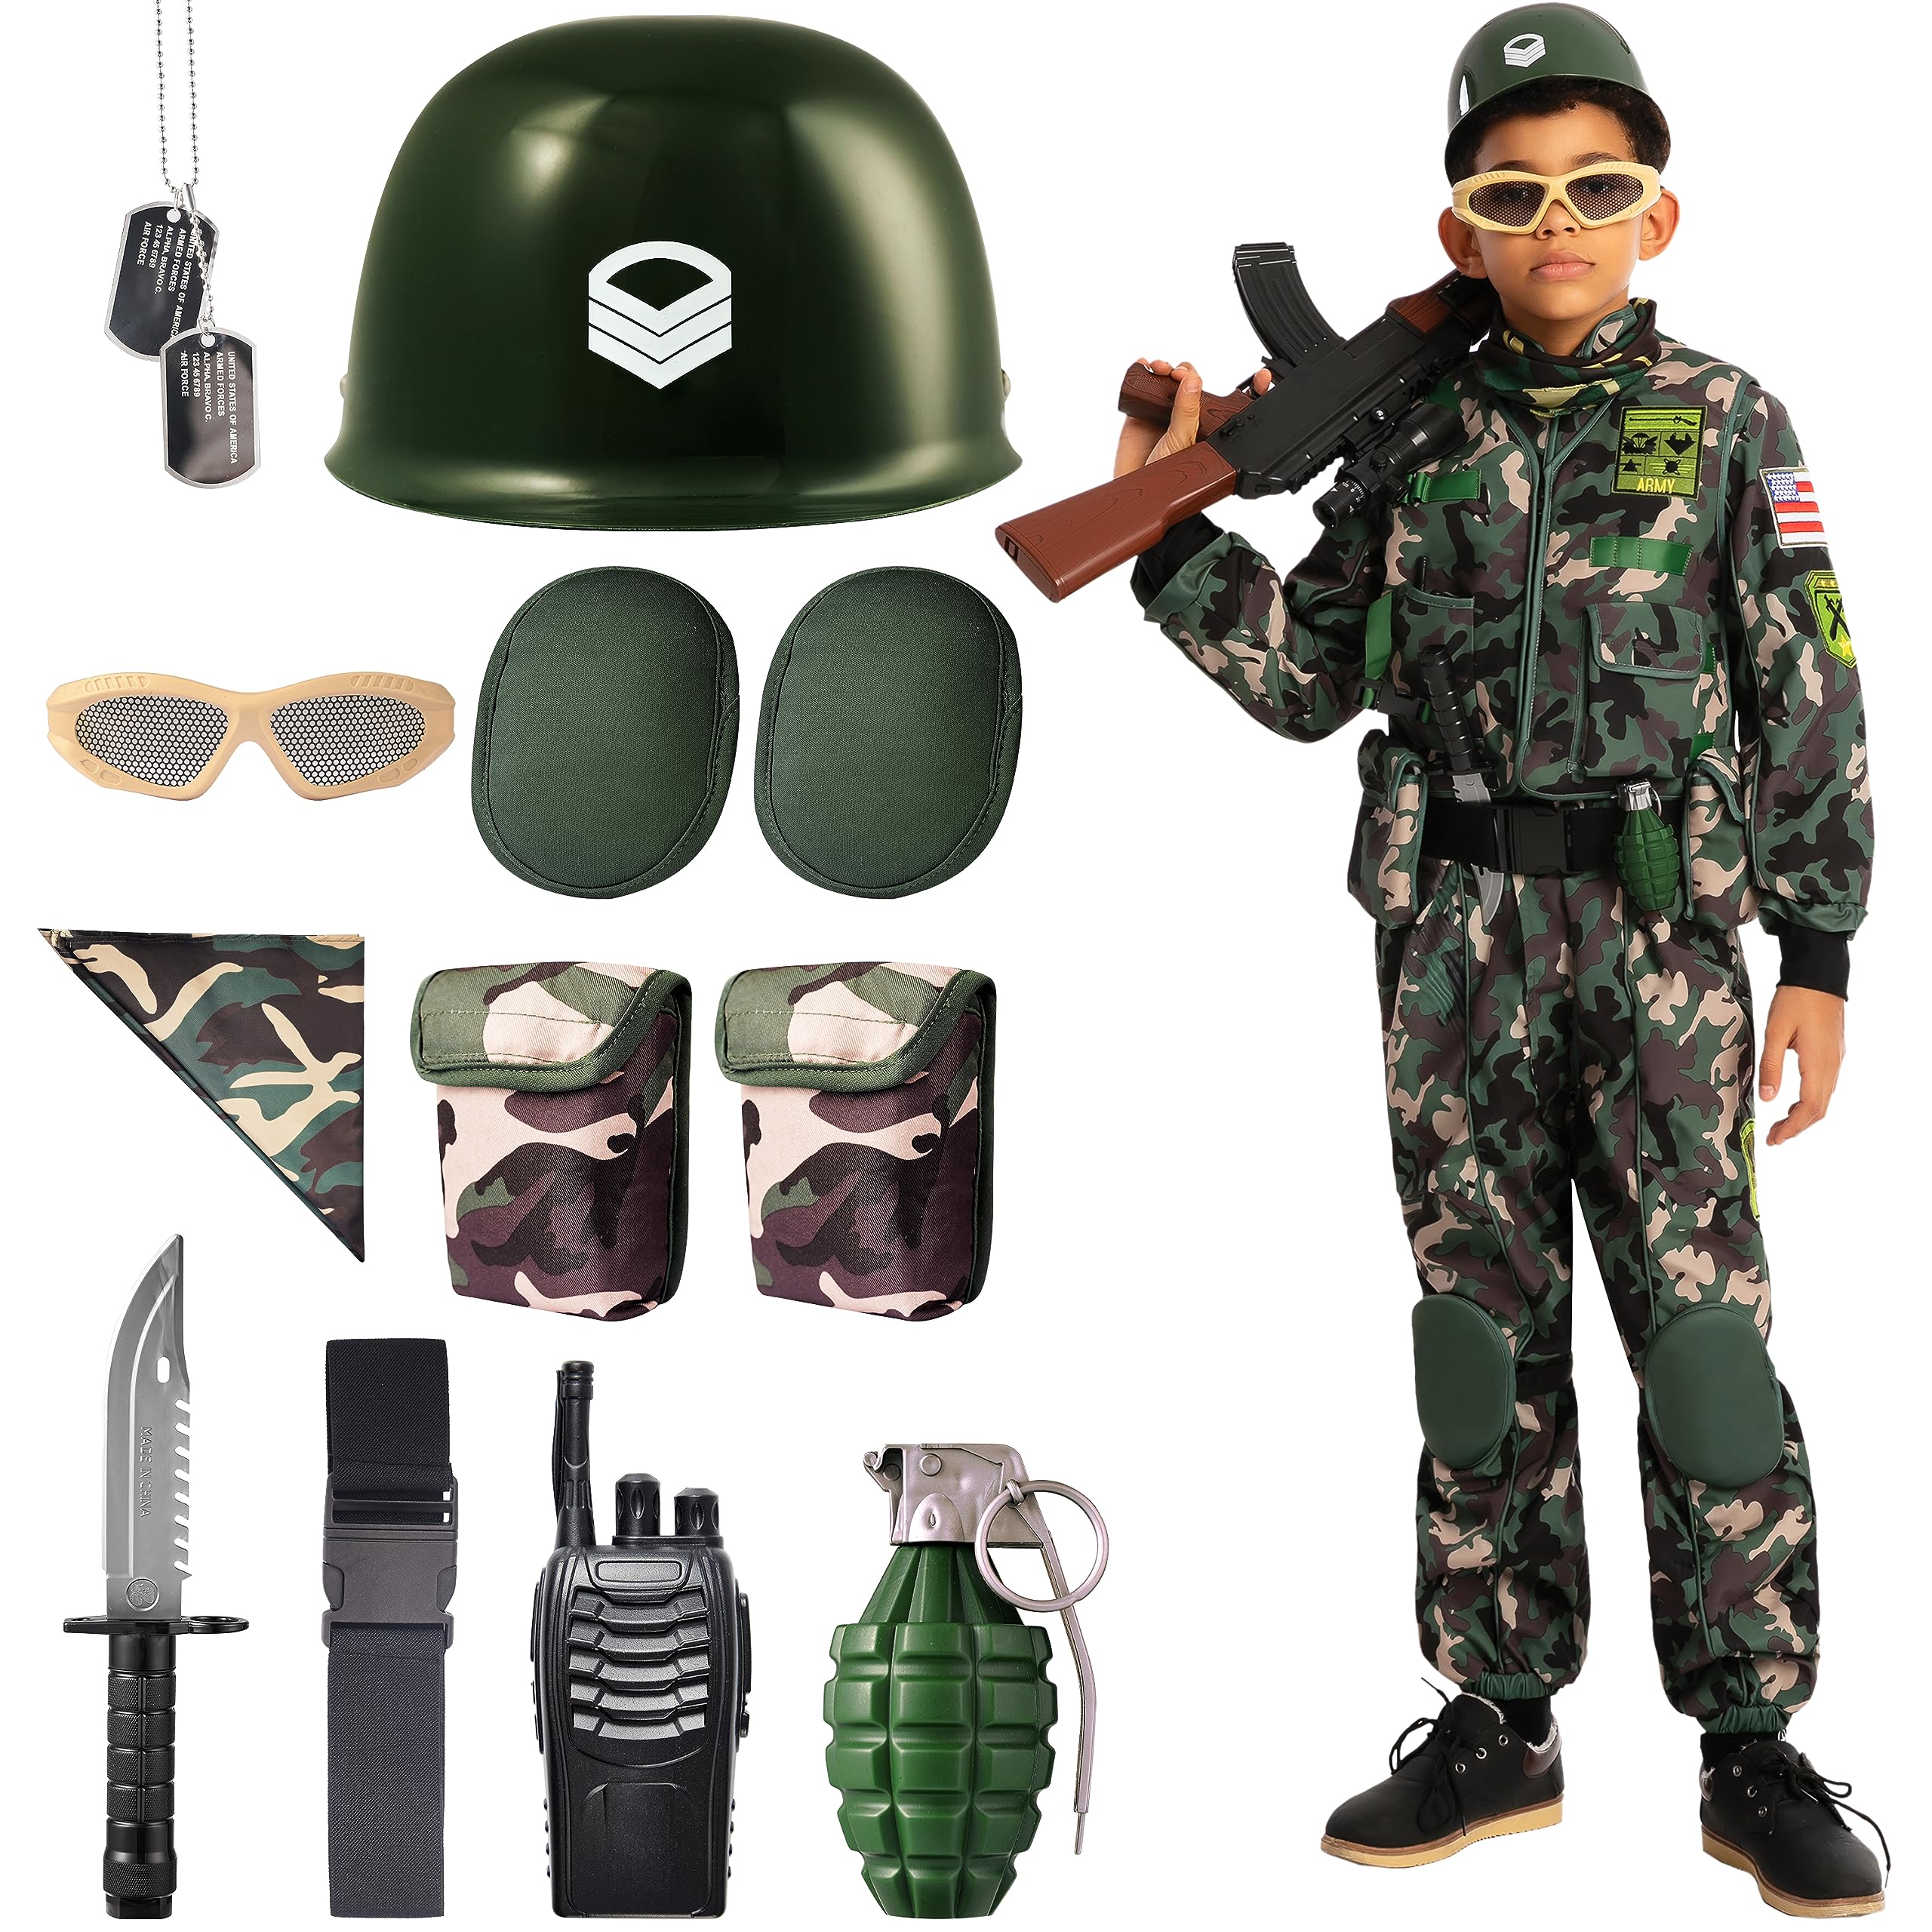 spooktacular style rock the army uniform for halloween fun